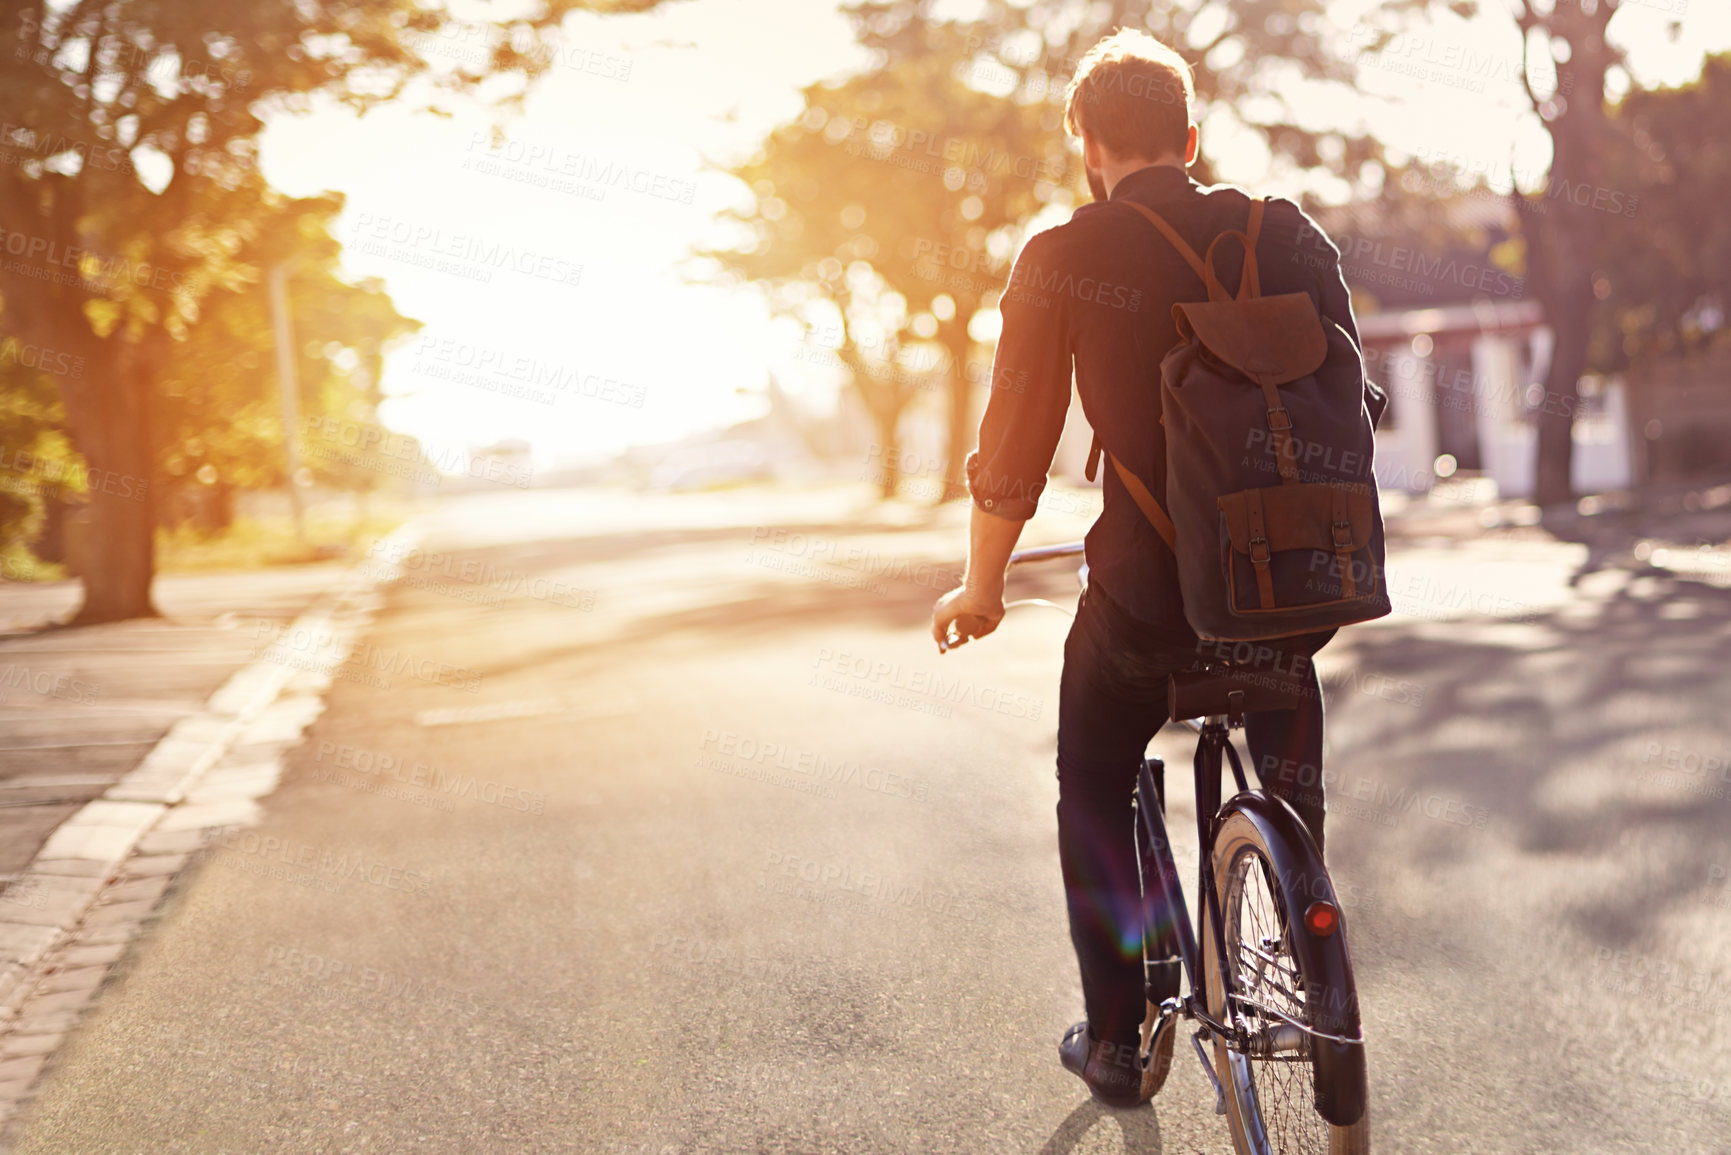 Buy stock photo Rearview shot of a young man riding a bicycle outdoors